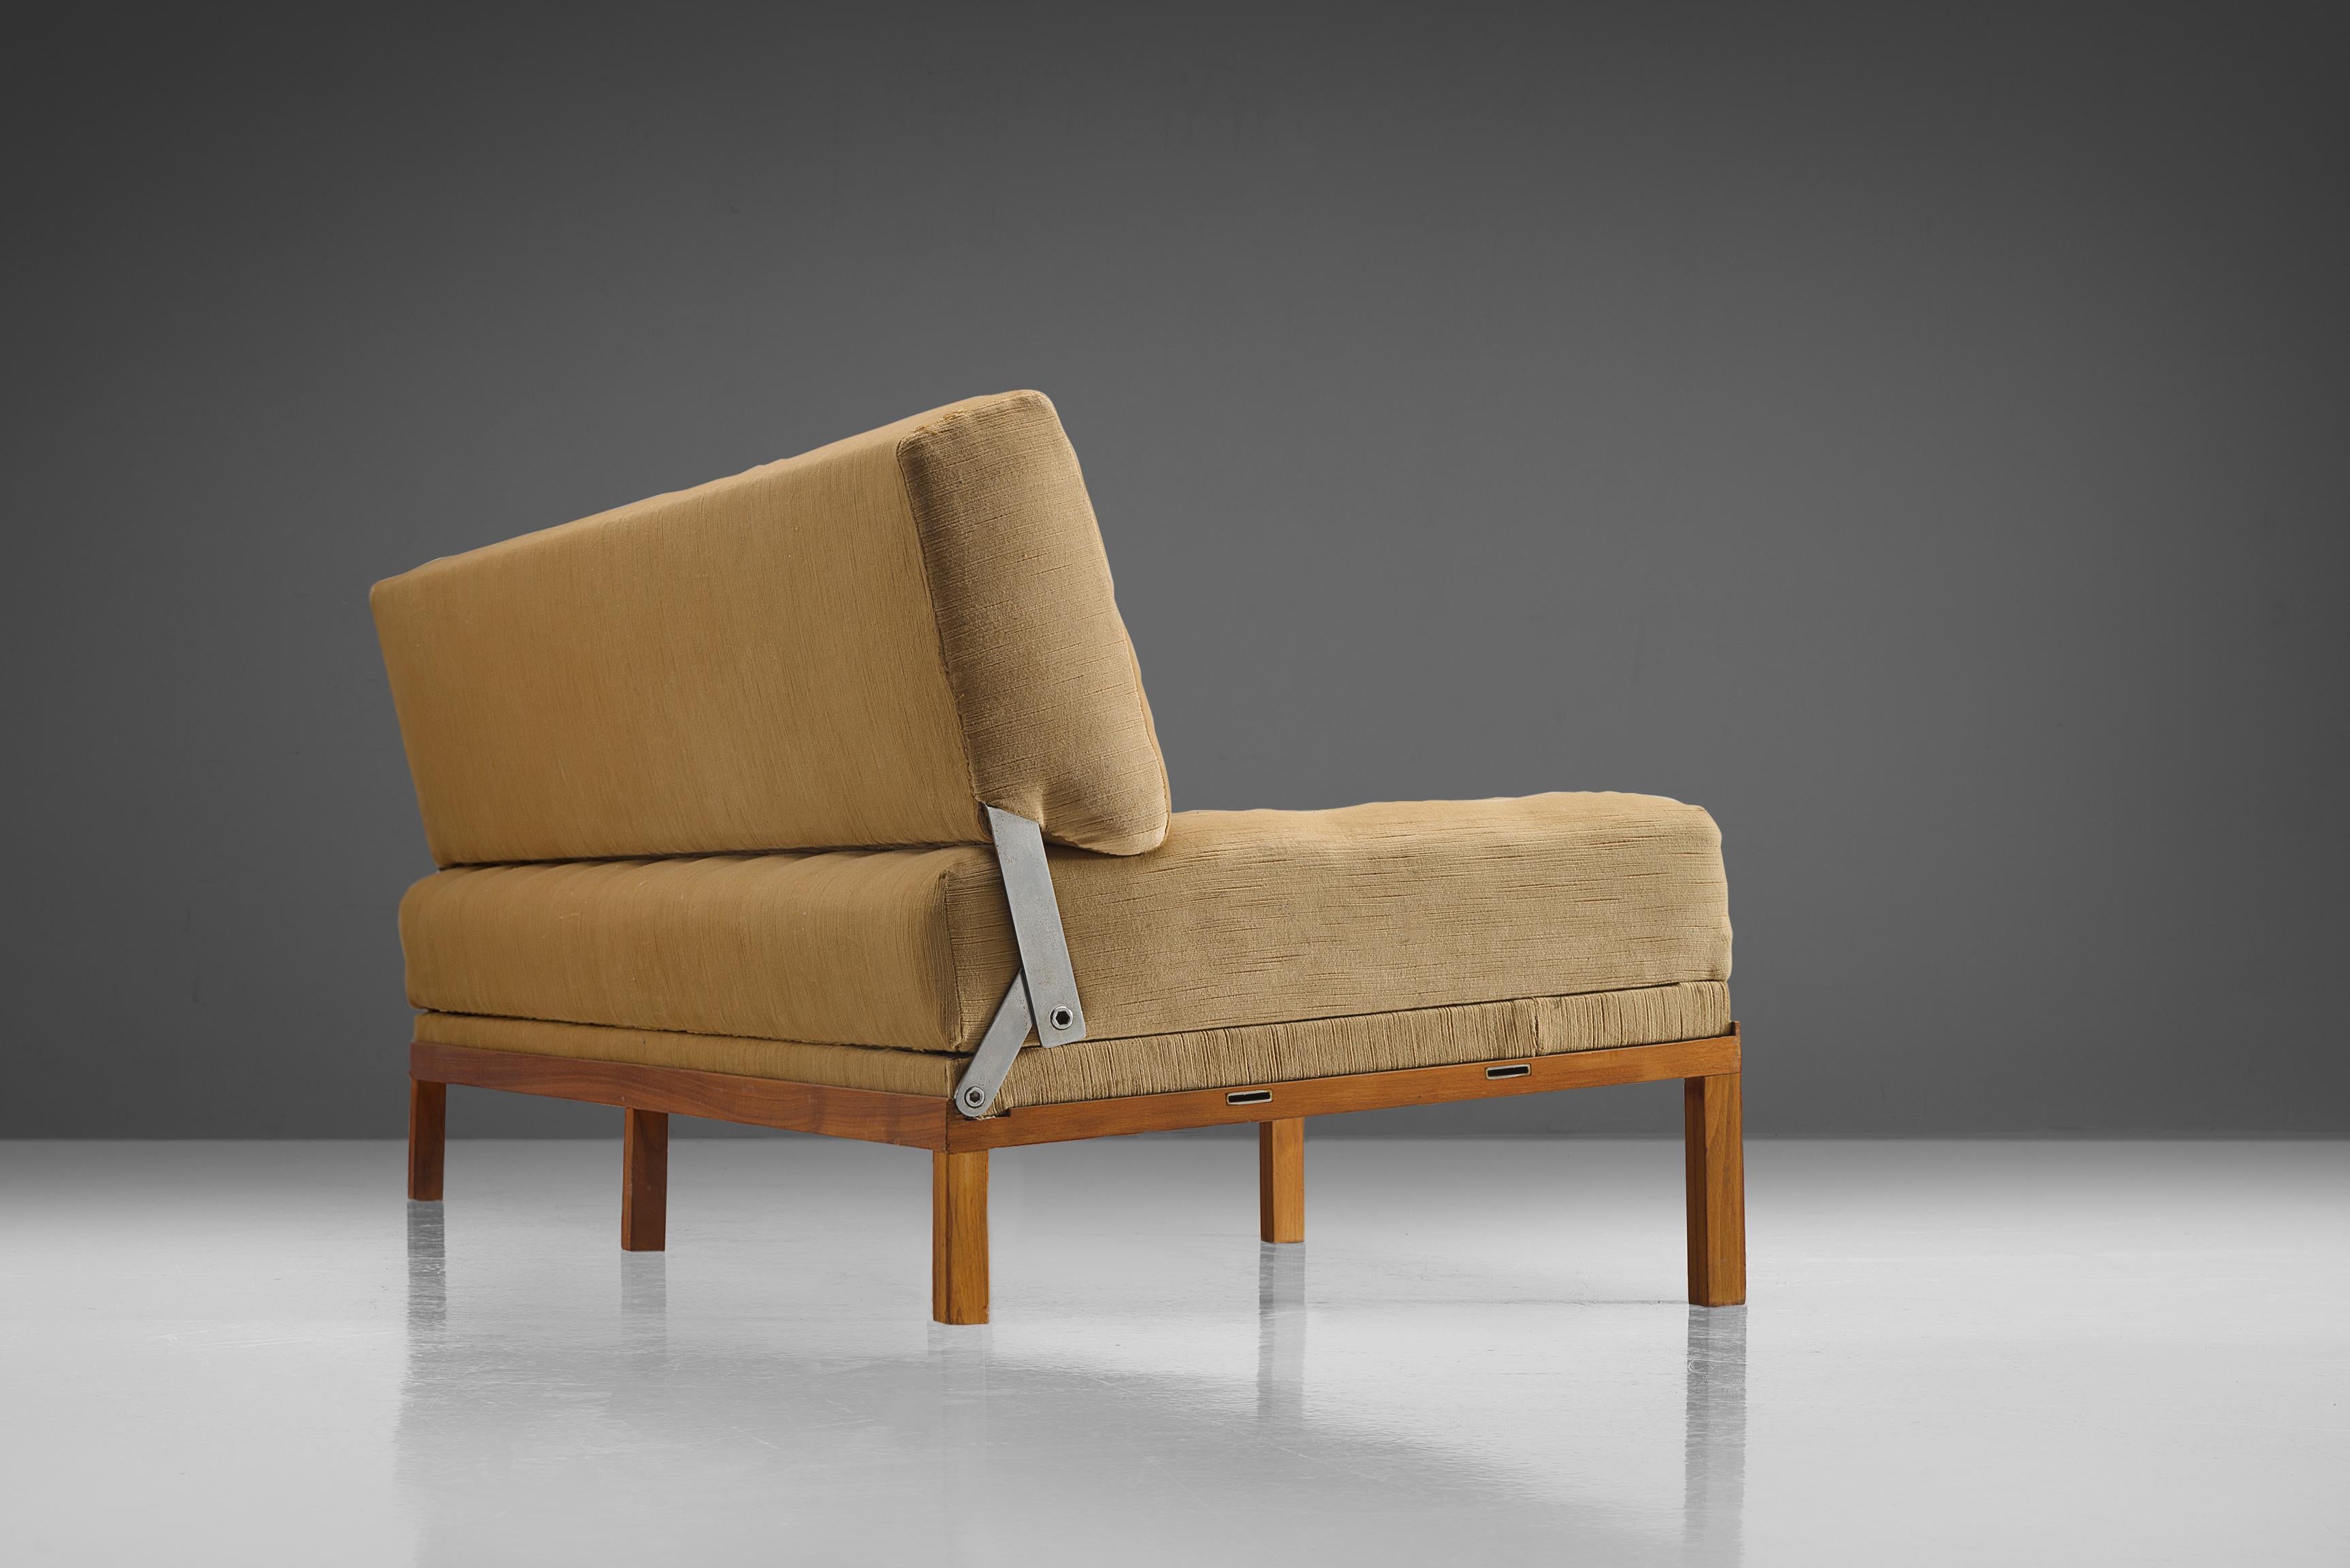 Austrian Johannes Spalt 'Constanze' Sofa or Daybed in Teak and Beige Upholstery 